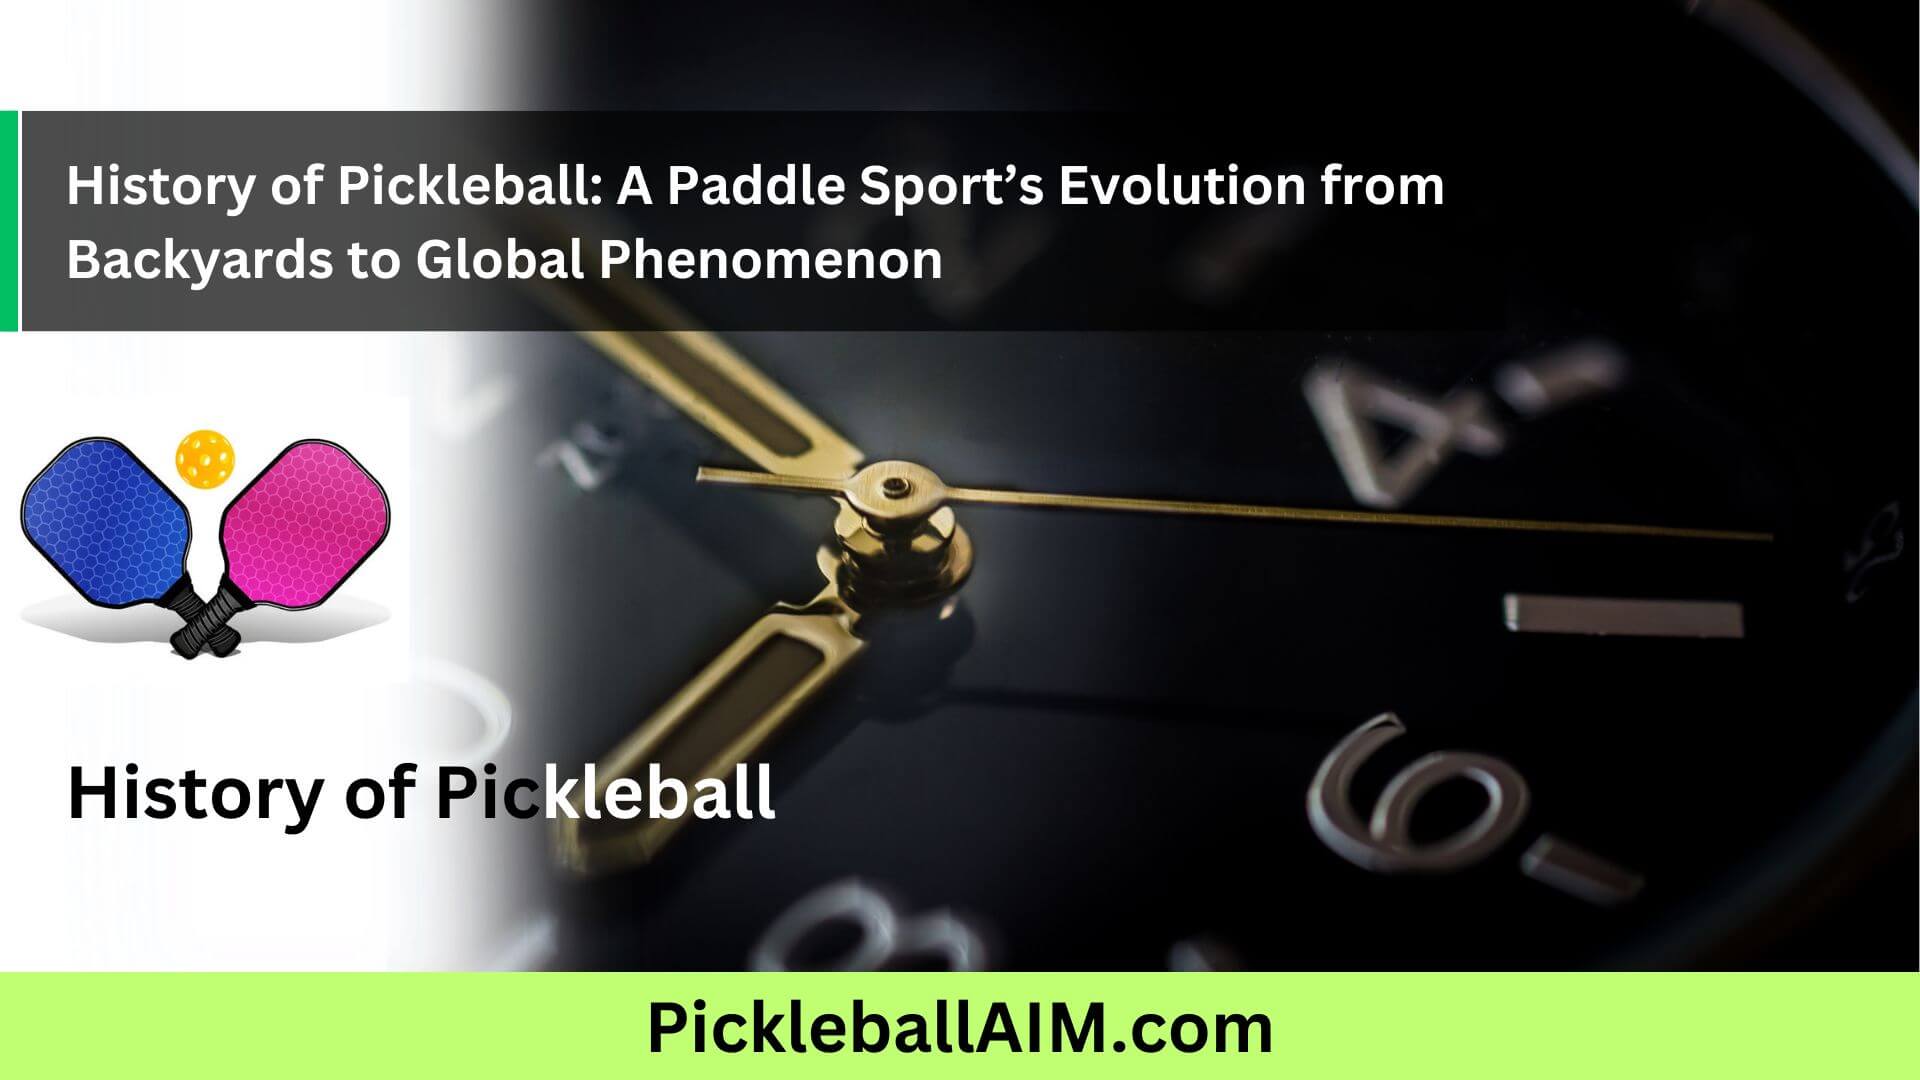 History of Pickleball A Paddle Sport's Evolution from Backyards to Global Phenomenon